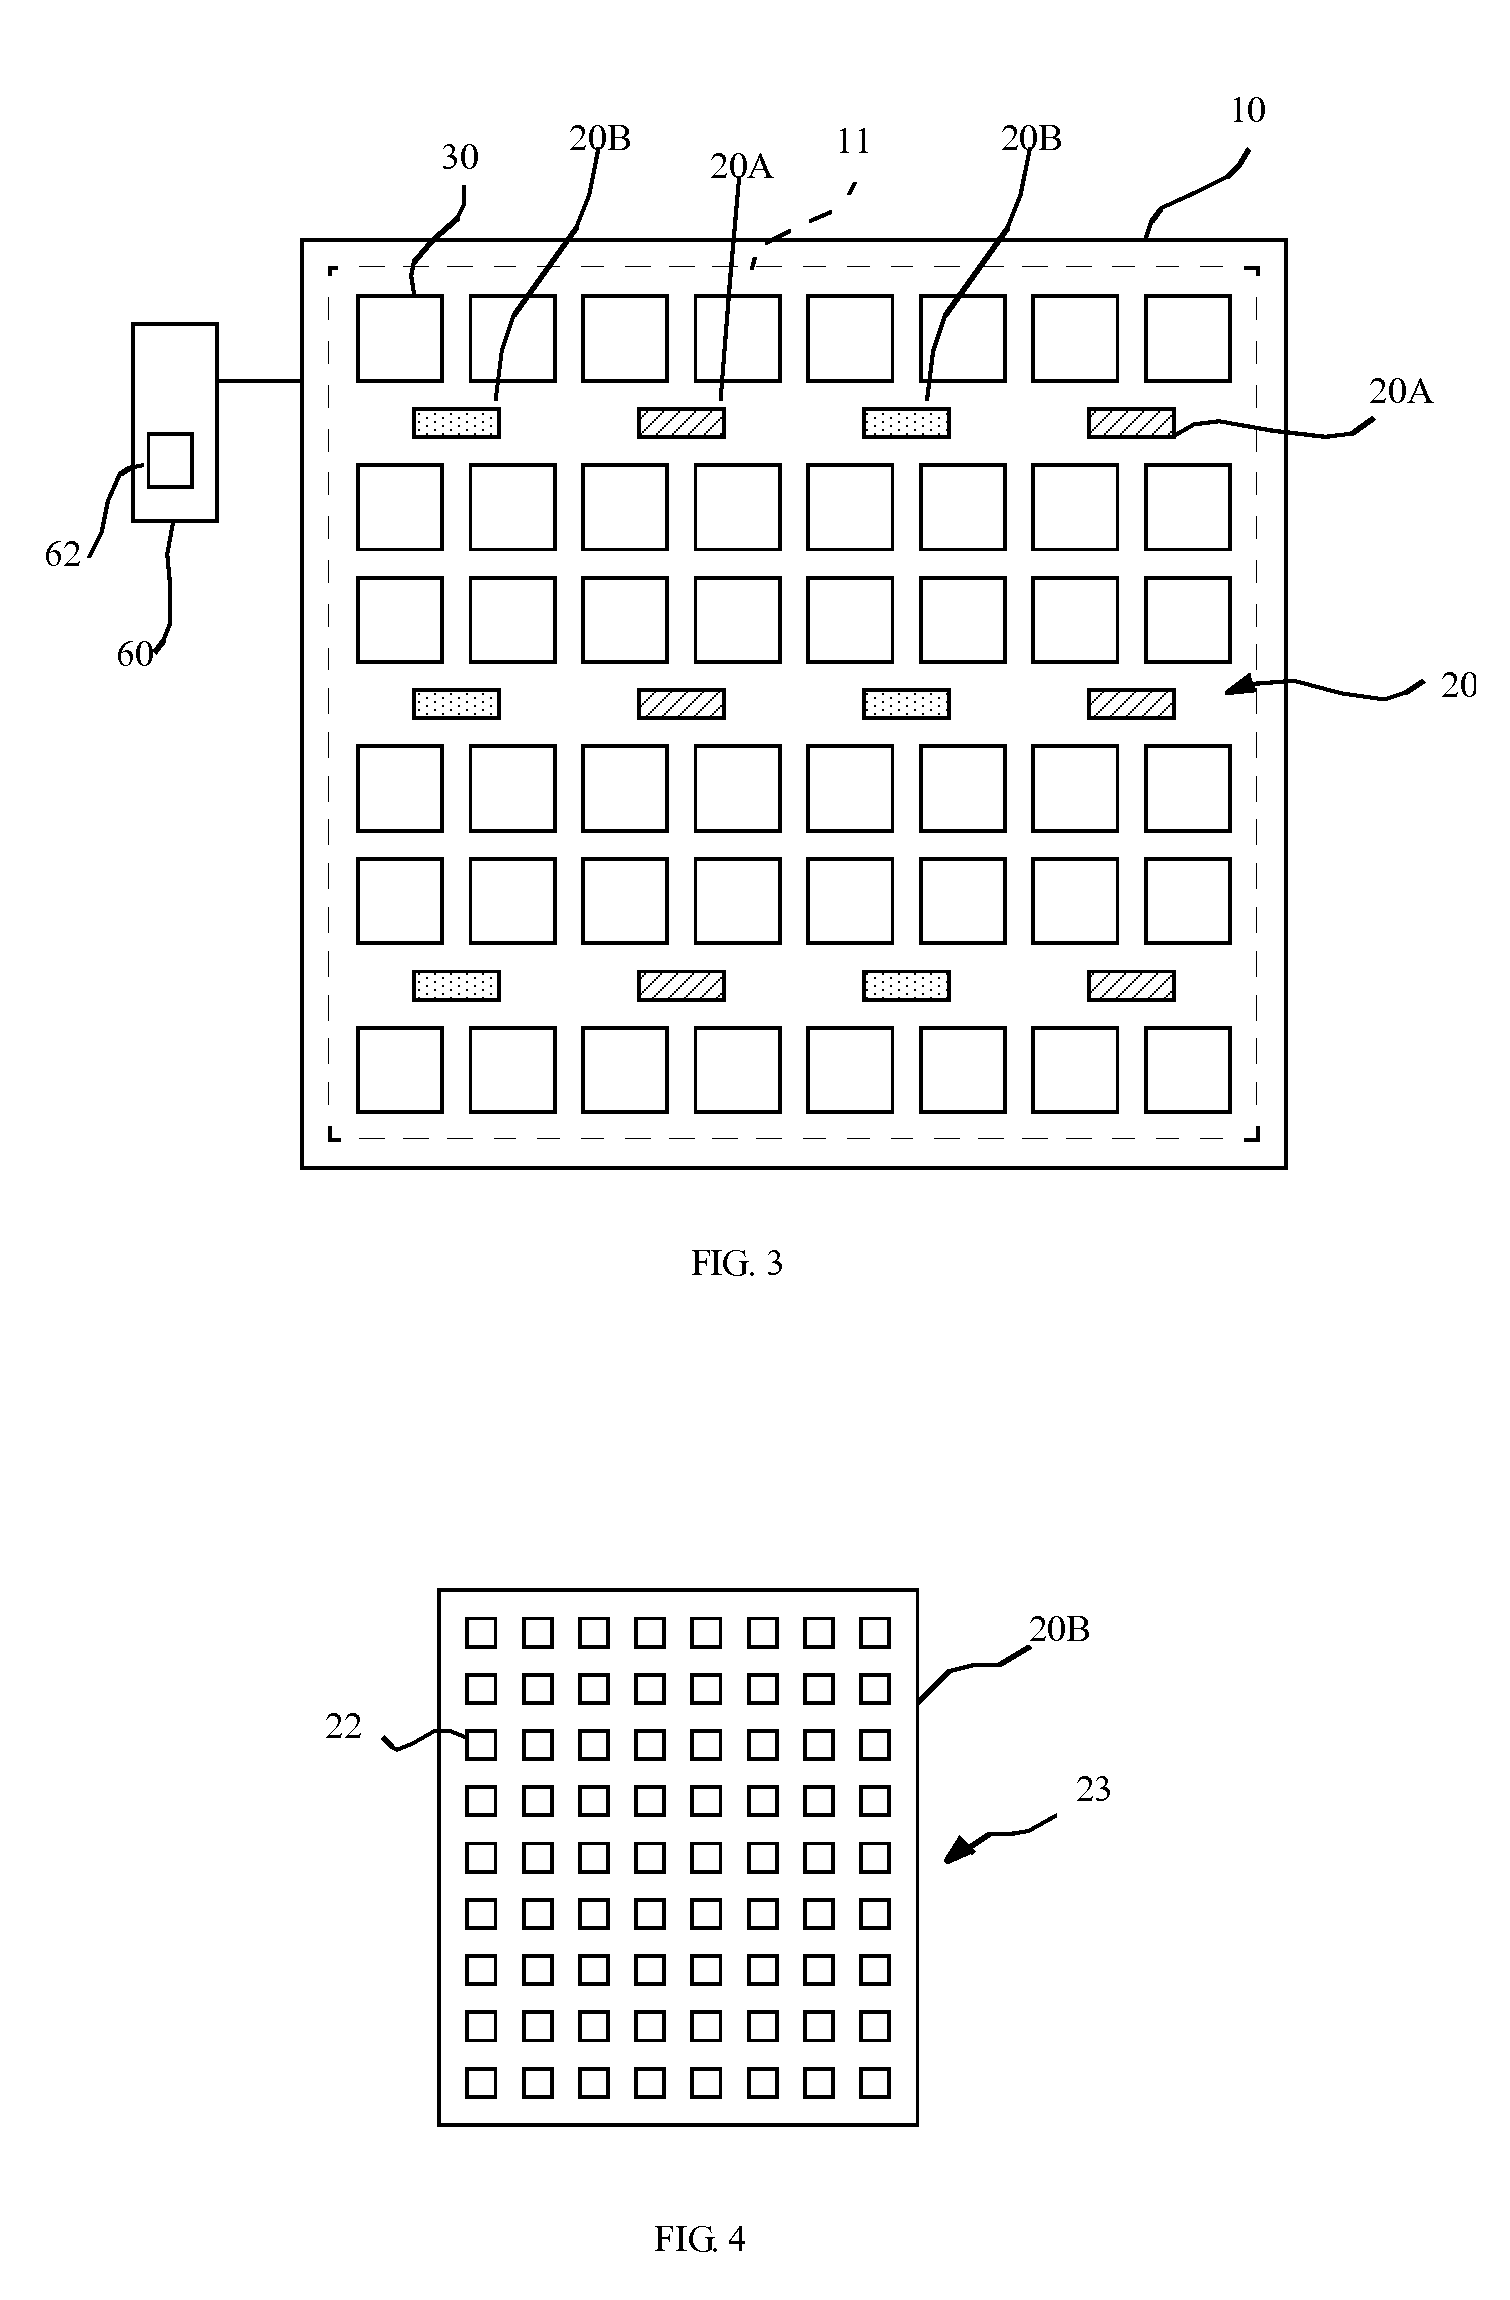 Apparatus for displaying and sensing images